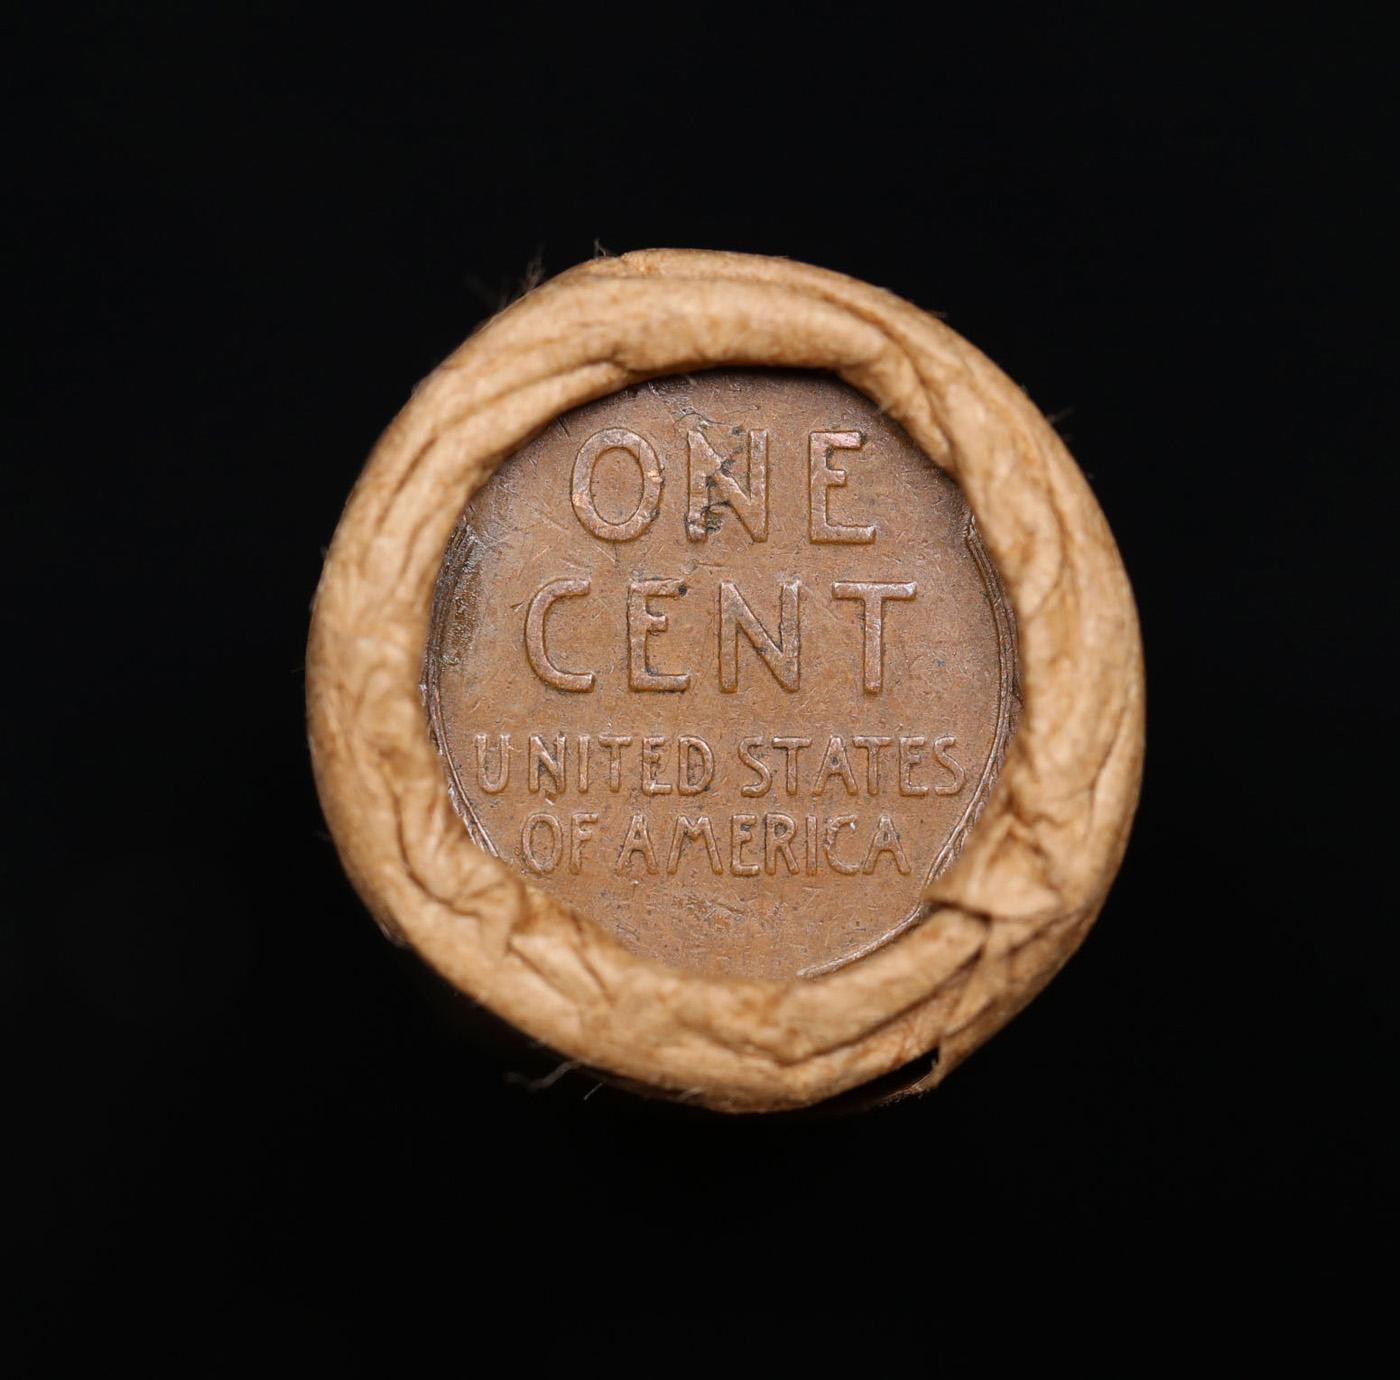 Lincoln Wheat Cent 1c Mixed Roll Orig Brandt McDonalds Wrapper, 1927-p end, Wheat other end